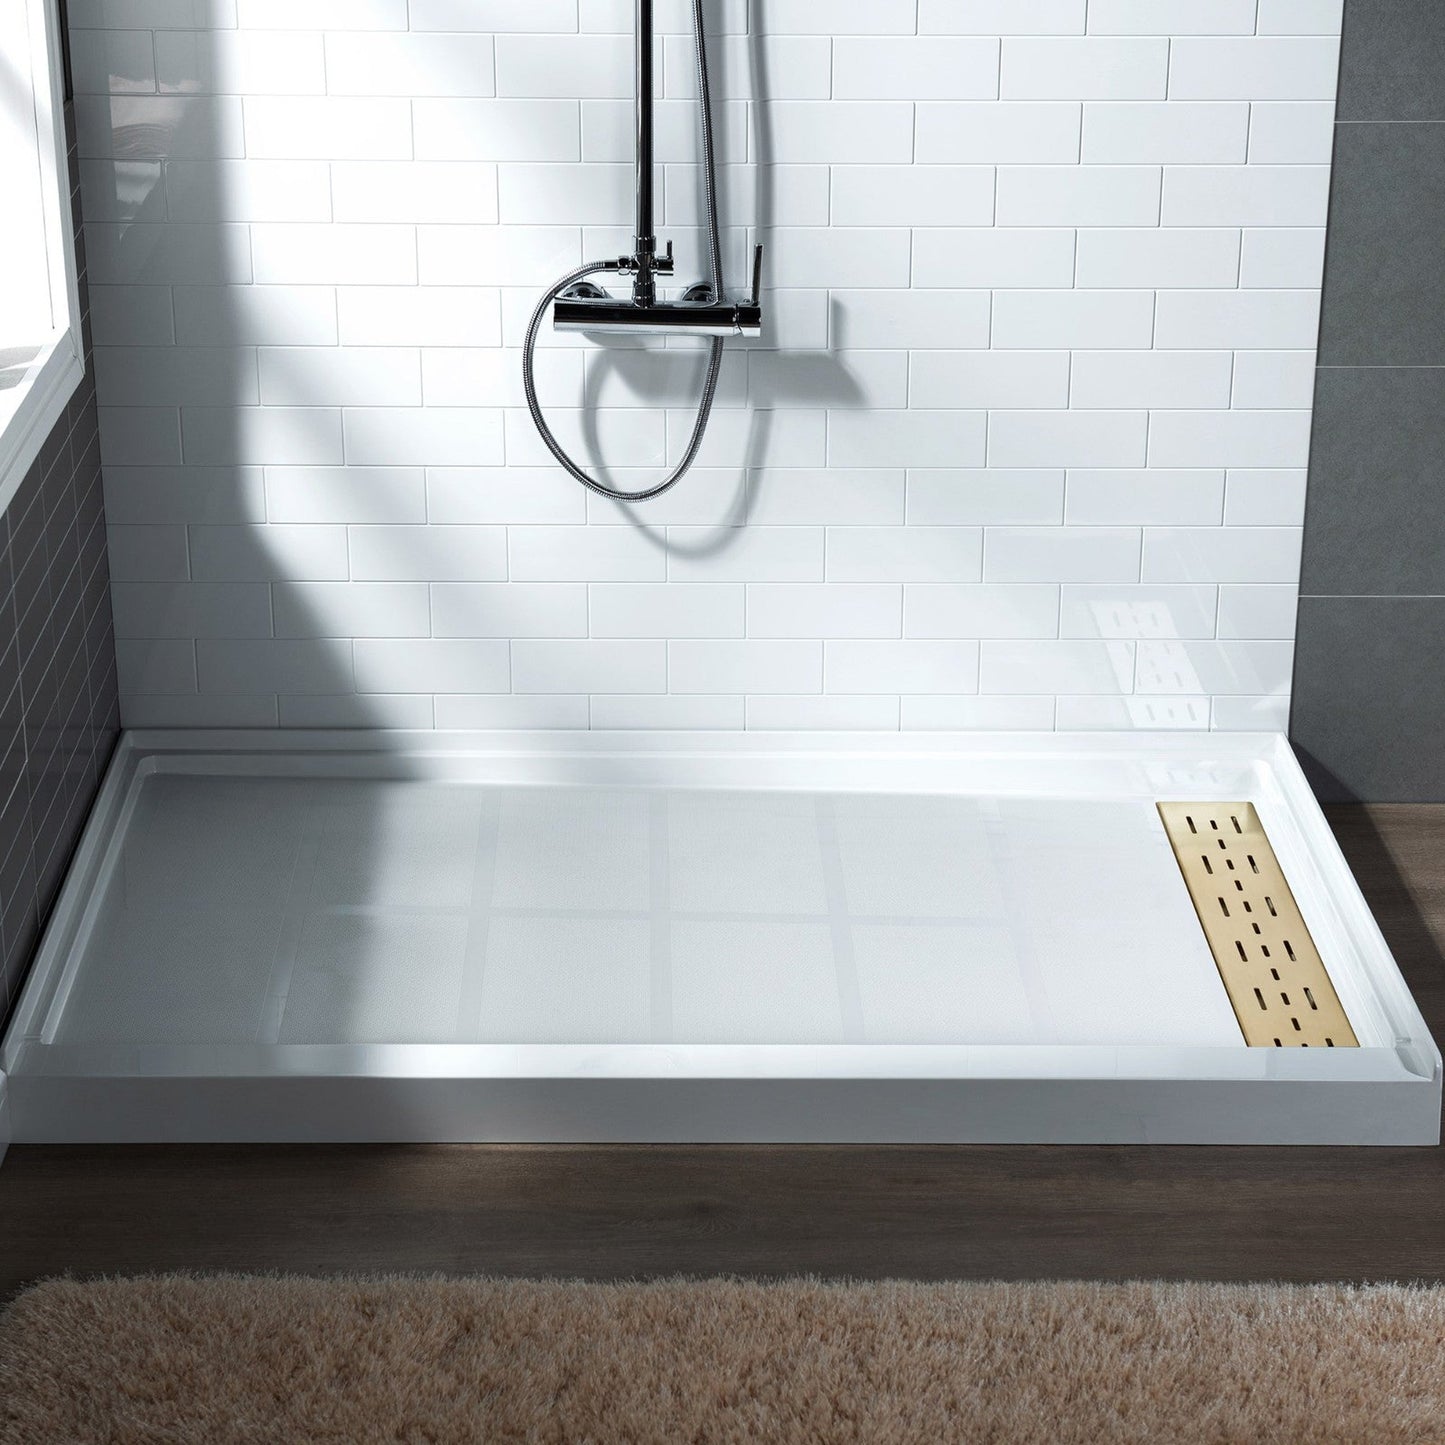 WoodBridge 60" x 30" White Solid Surface Shower Base Right Drain Location With Brushed Gold Trench Drain Cover